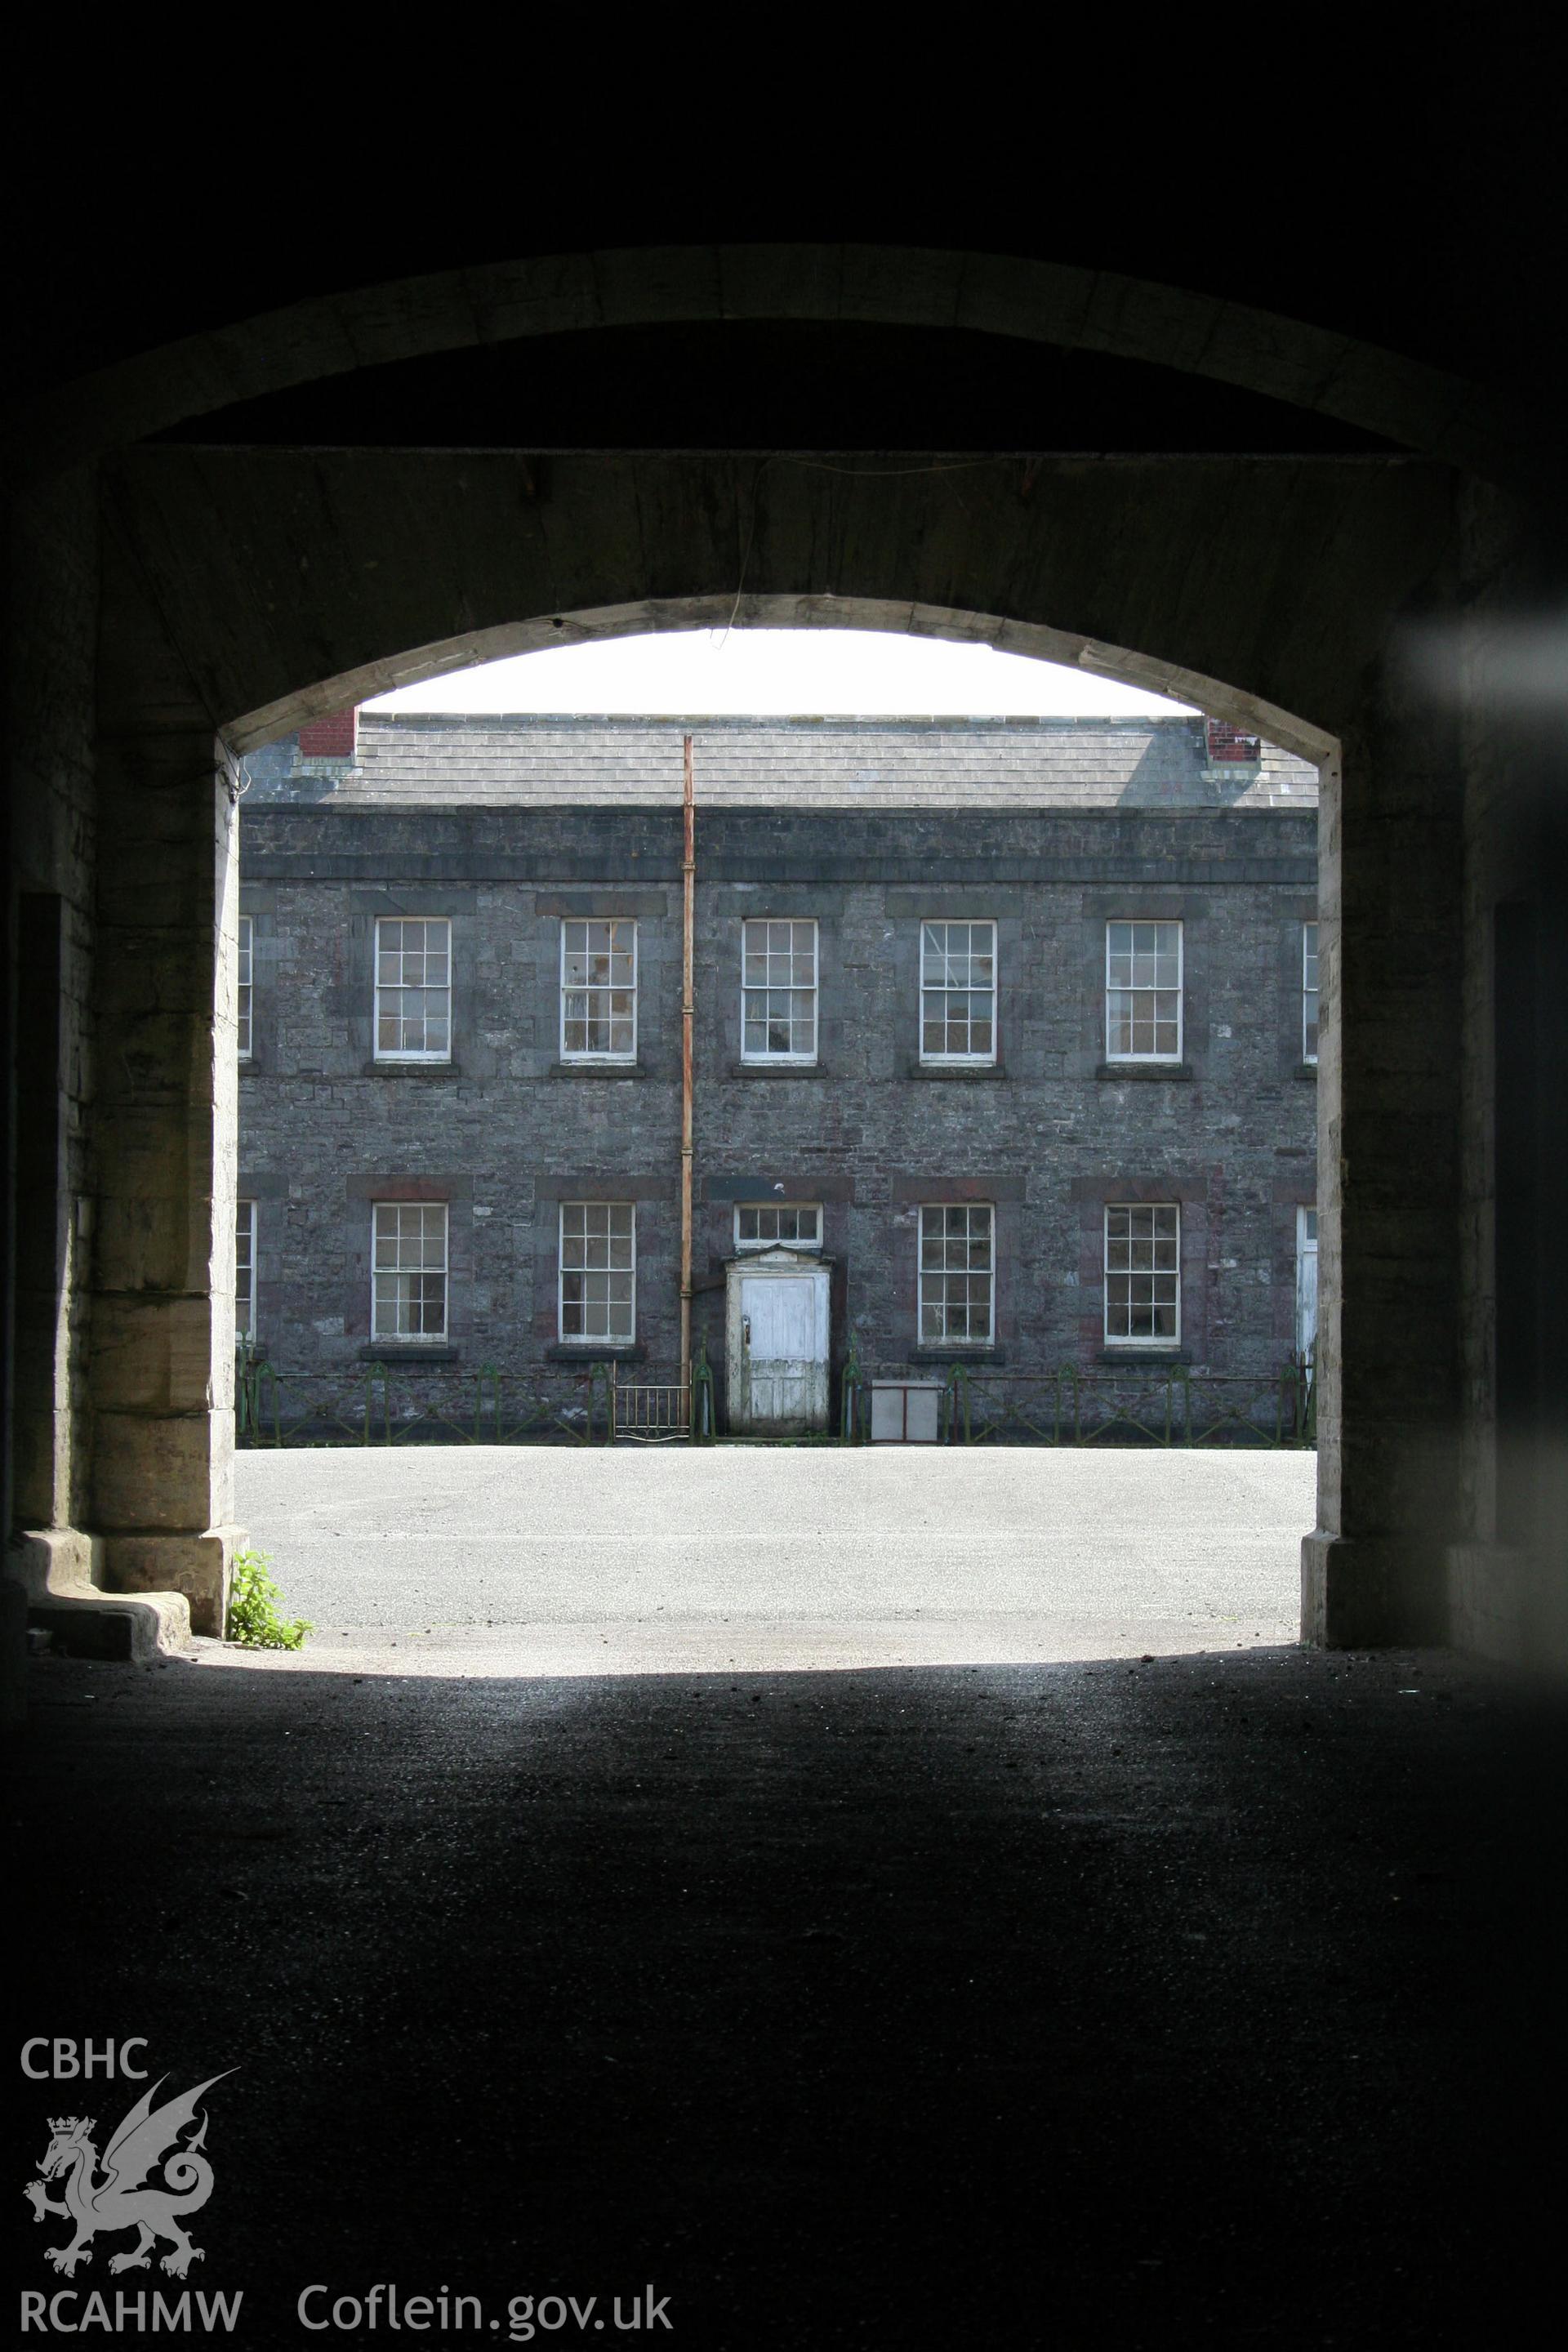 The Former Defensible Barracks, part of the Georgian square in the centre of the barracks.